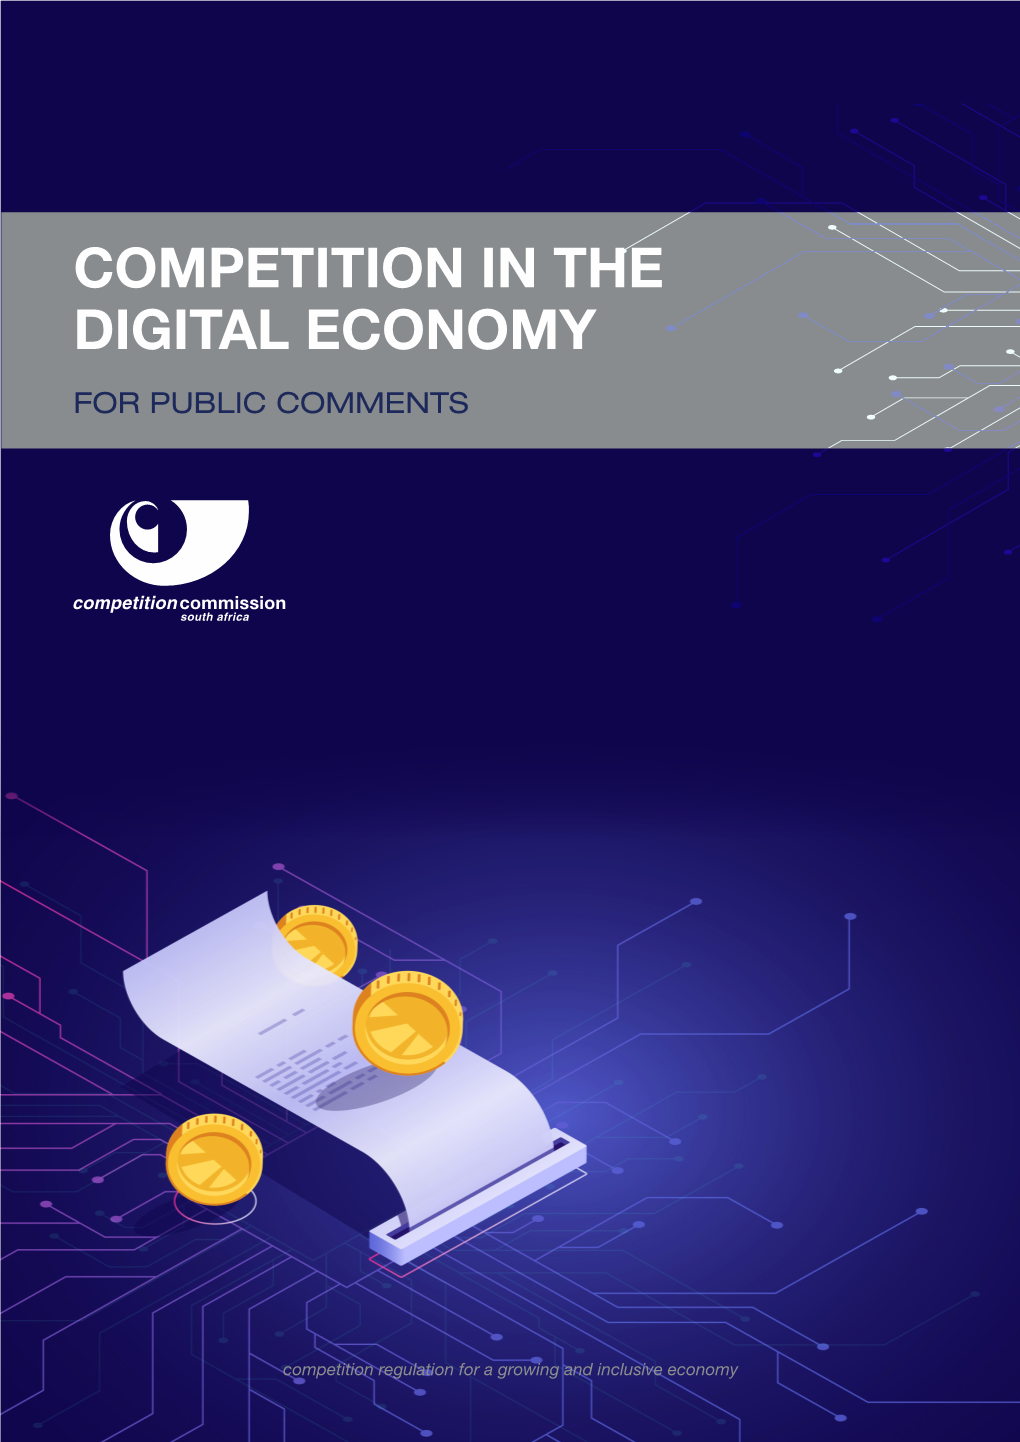 Competition in the Digital Economy